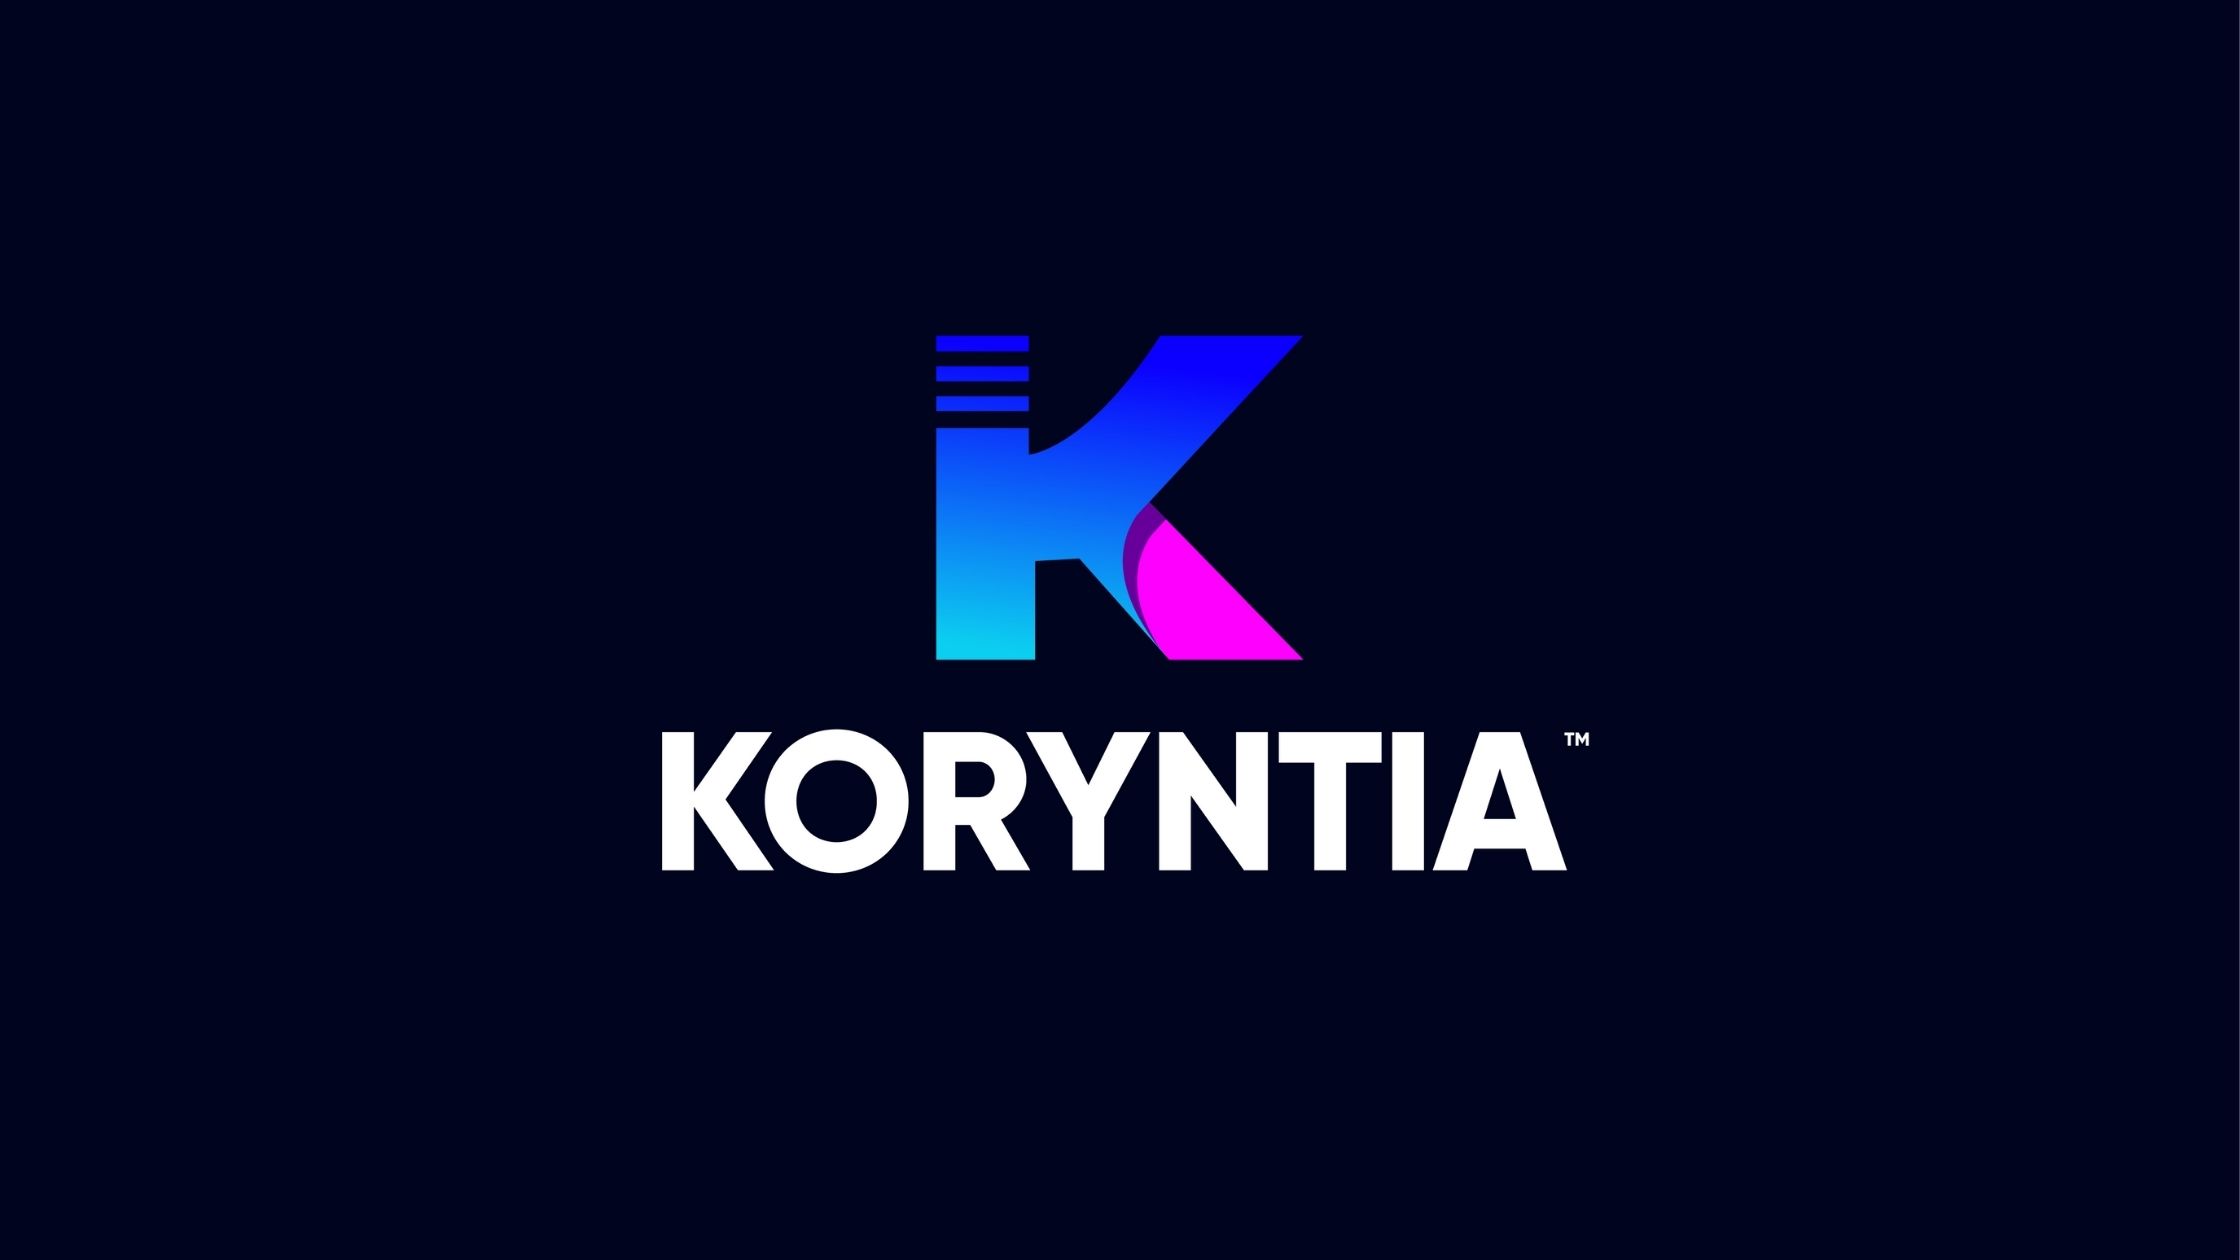 New Startup Koryntia Launches to Simplify the Process of Getting Credits